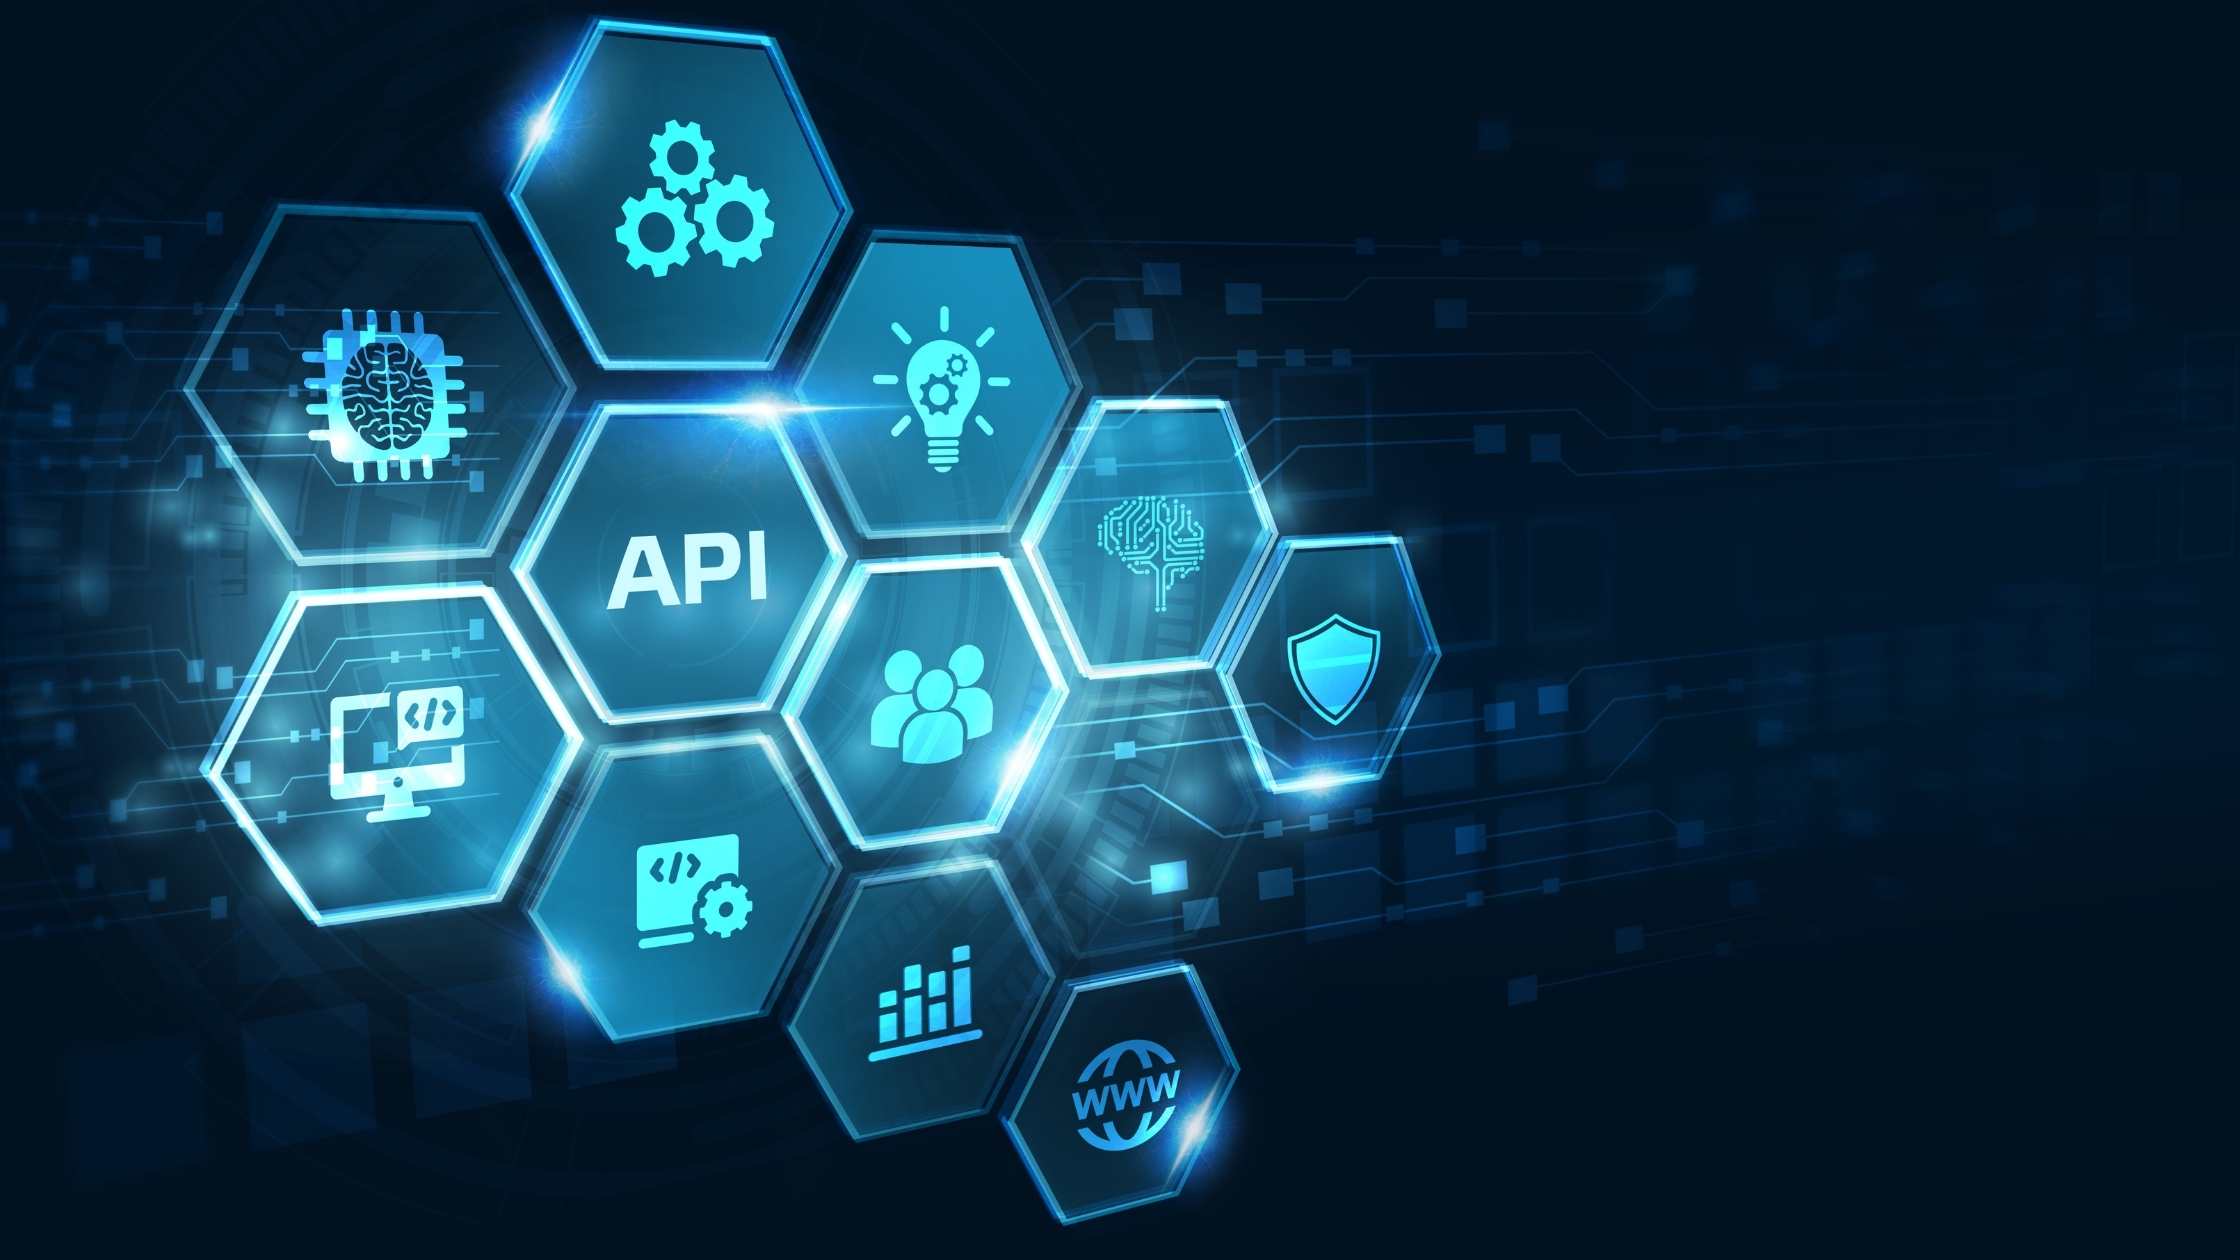 API Application Programming Interface concept, dark background with blue hexagons and technology icons